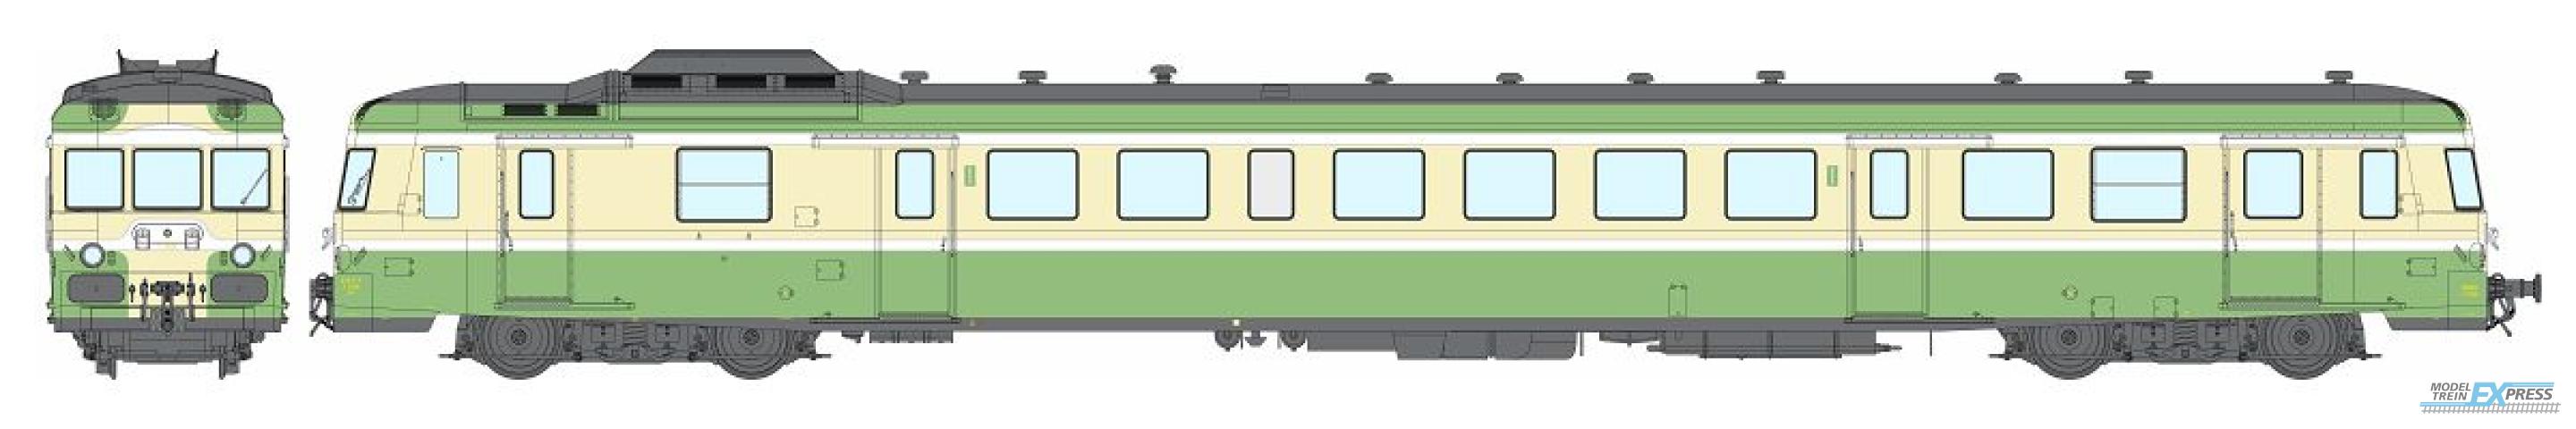 REE models MB-228 X 2899 with skirt, 1st class Origin, Green 314 and Yellow straw 410, RENNES, SNCF Era III - ANALOG DC